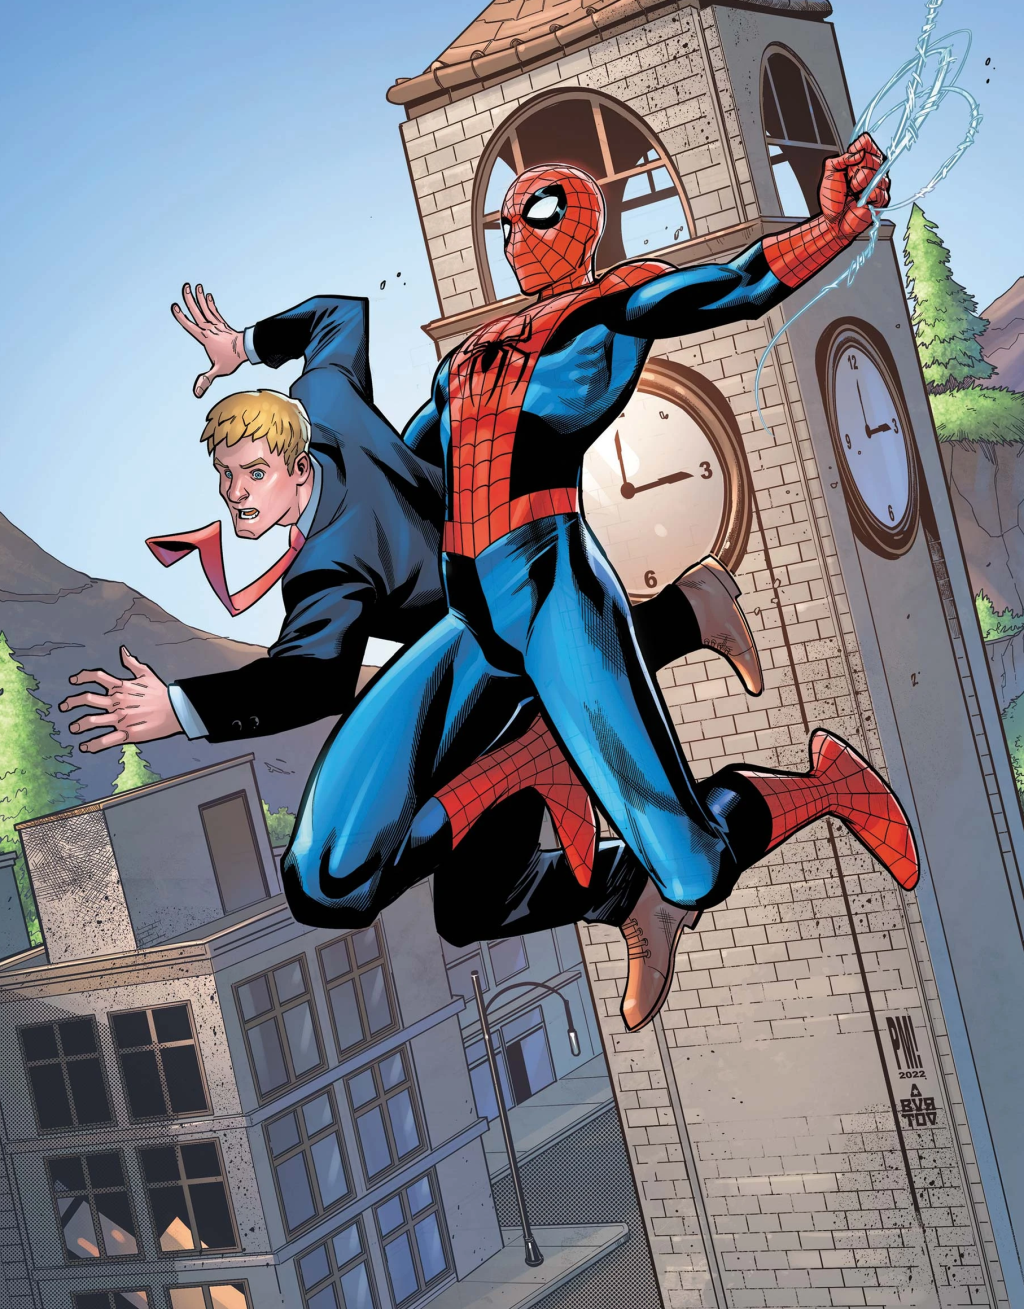 Spider-Man comes to Jonsey's rescue on Paco Medina's variant cover to Fortnite x Marvel: Zero War Vol. 1 #2 (2022), Marvel Comics